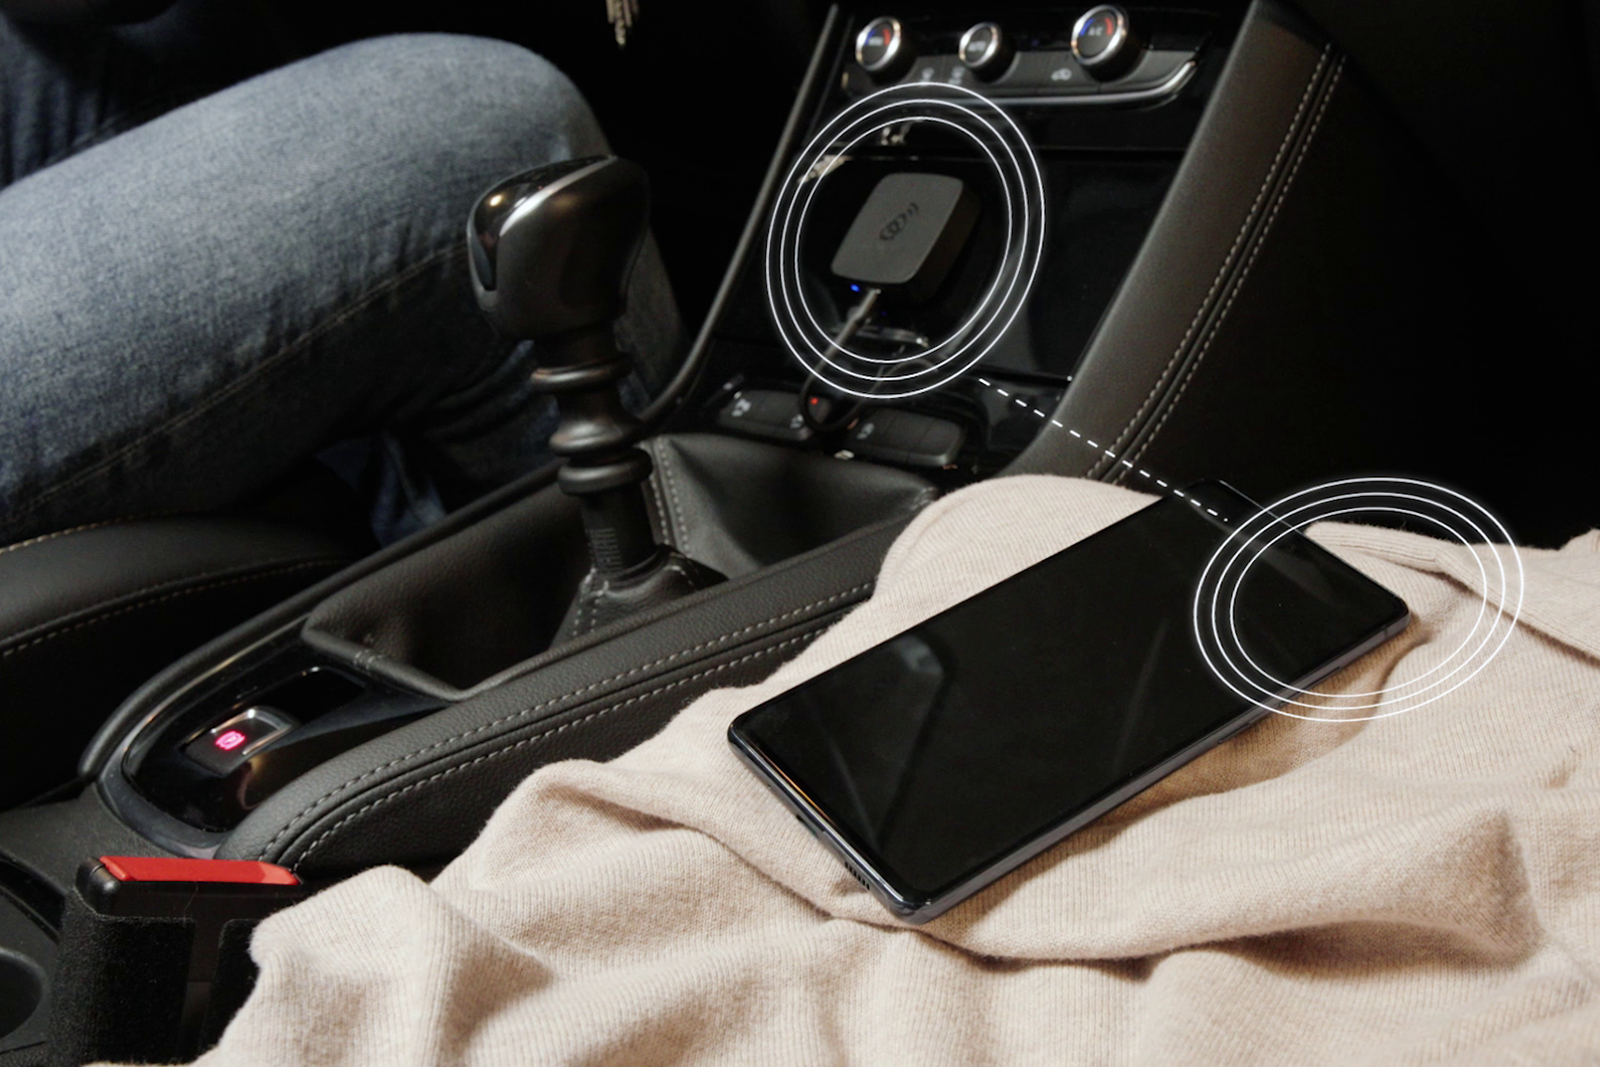 Say goodbye to tangled cables with the AAWireless Android Auto Adapter